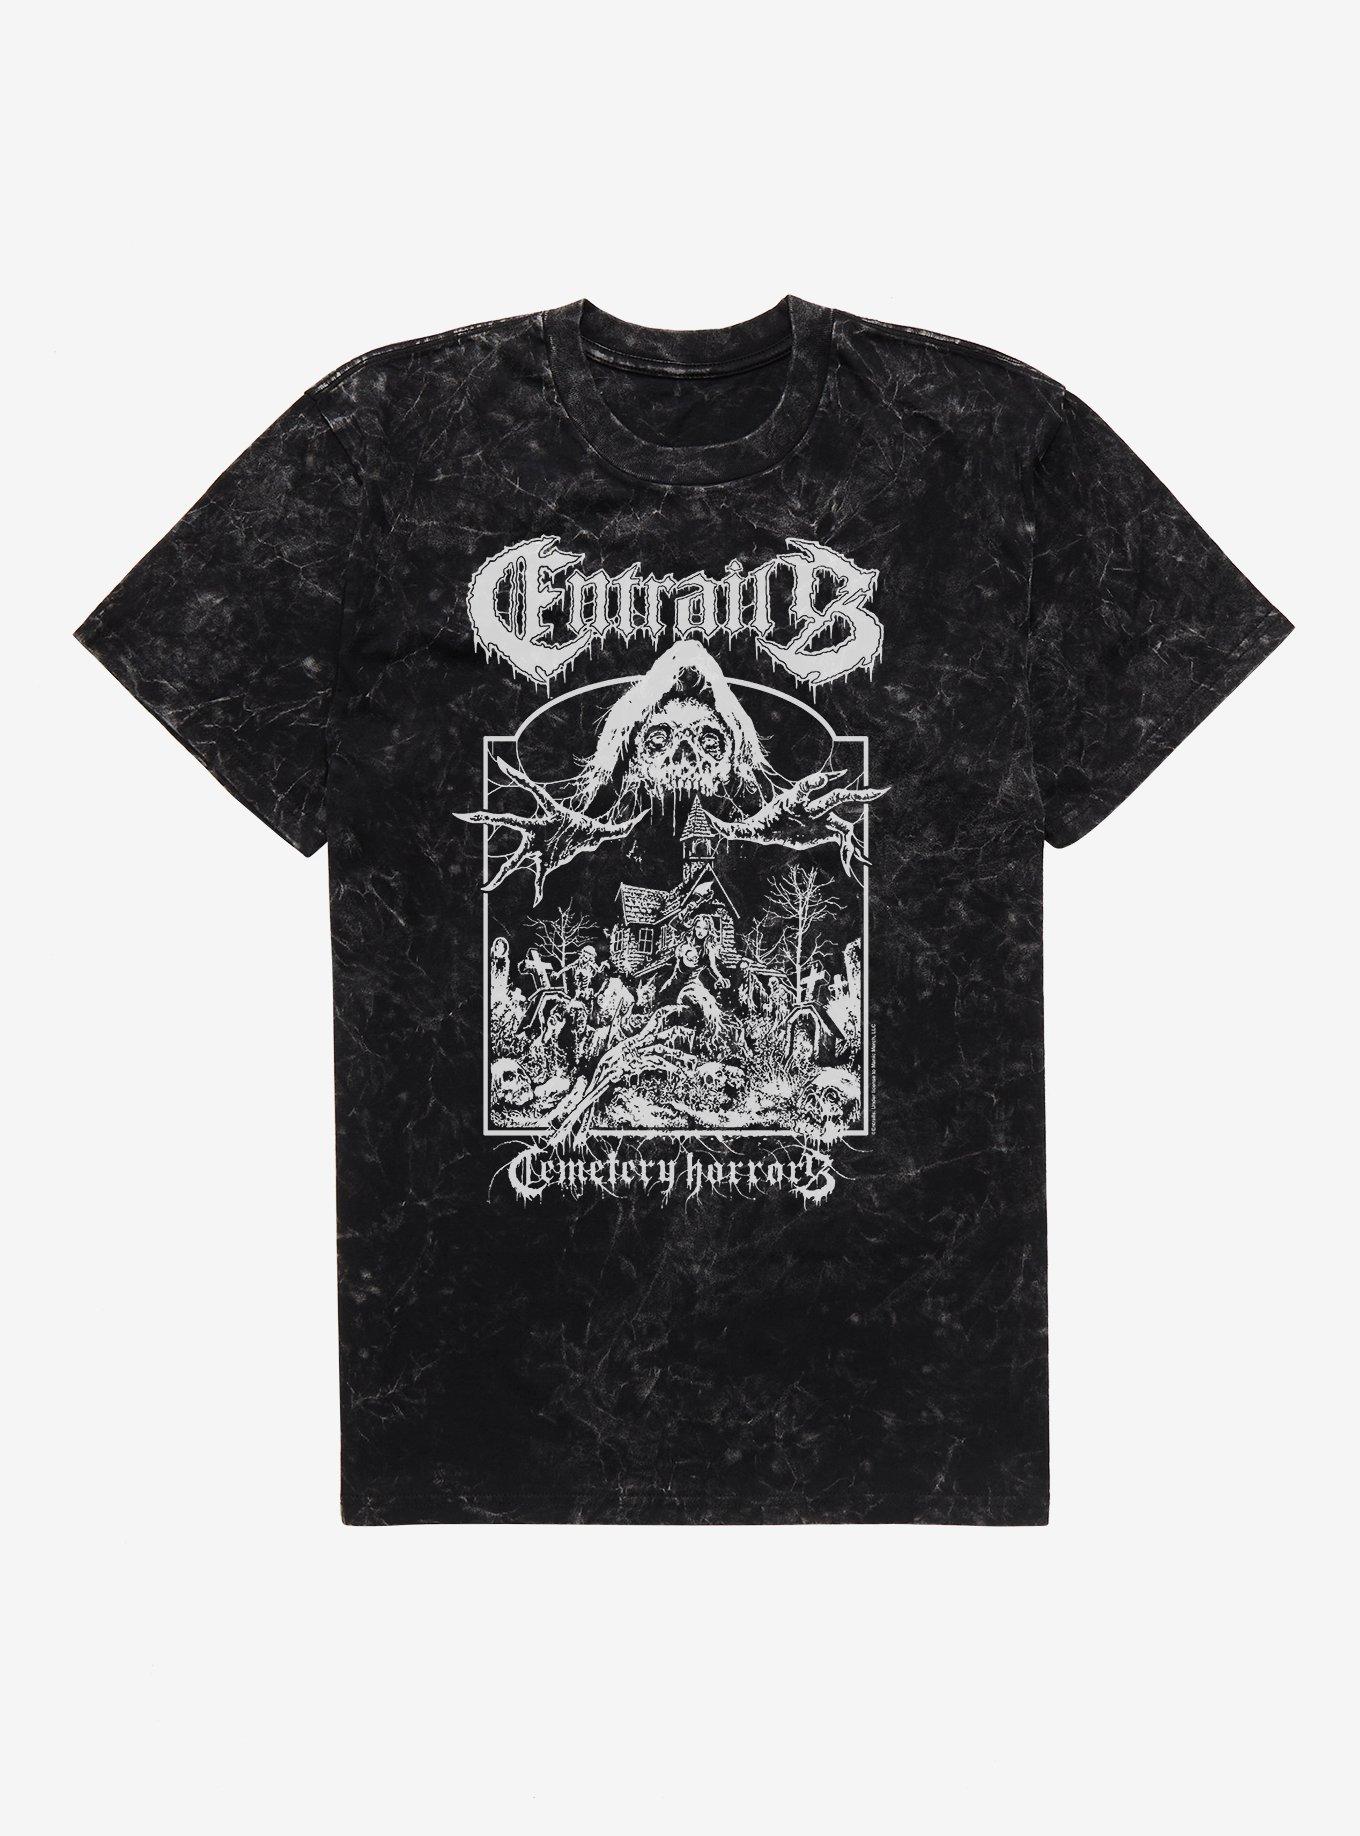 Entrails Cemetery Horrors Mineral Wash T-Shirt, BLACK MINERAL WASH, hi-res